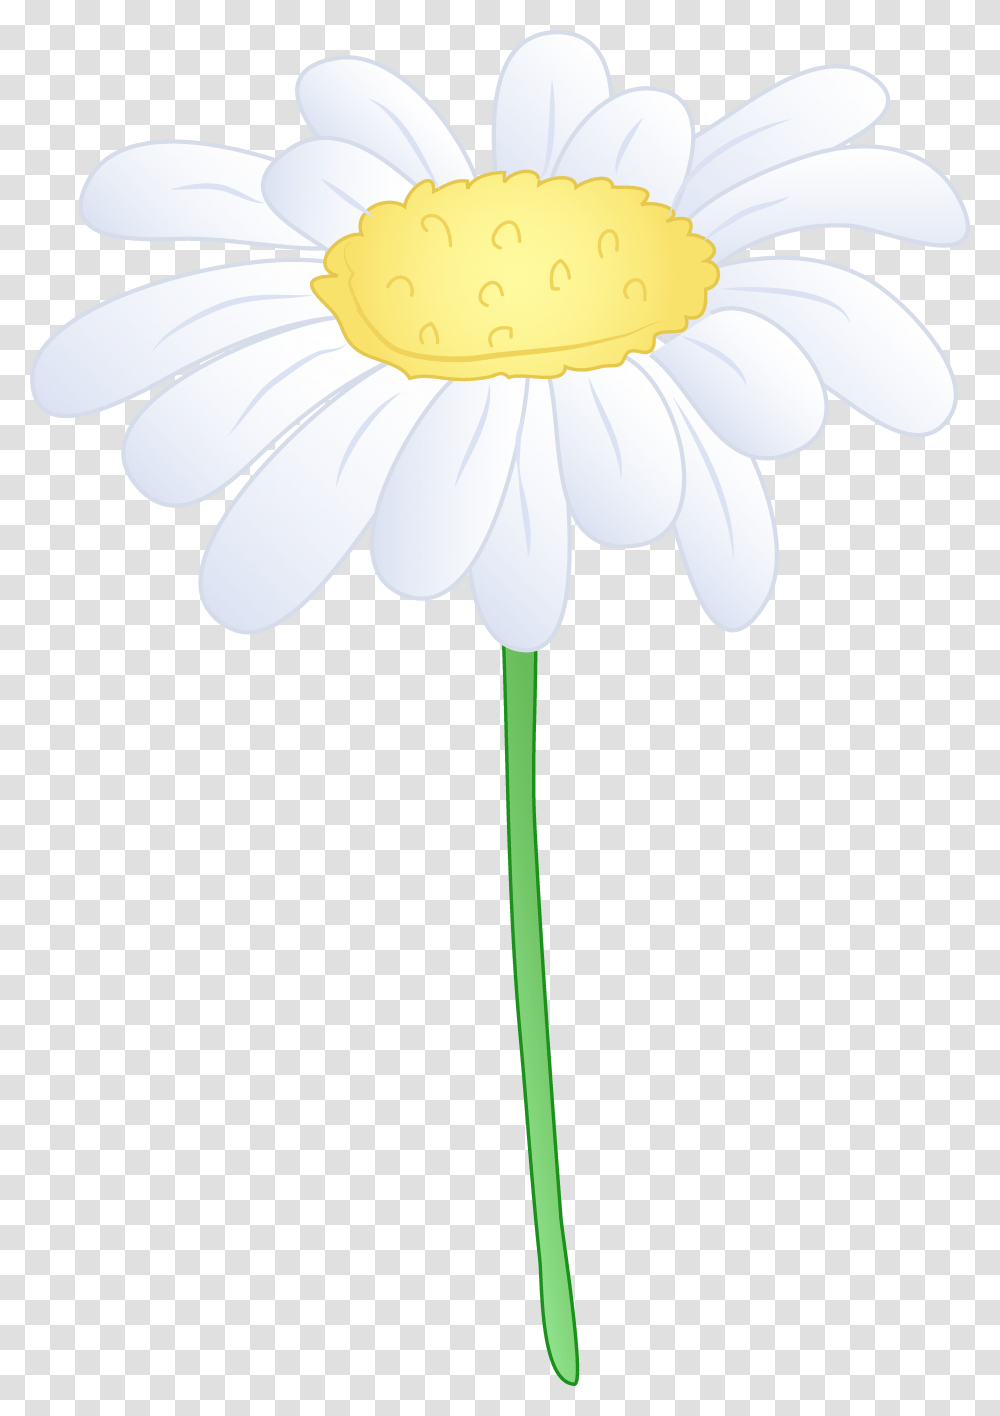 White Daisy Flower Hd Photo Clipart White Single Daisy Flower, Plant, Blossom, Daisies, Anther Transparent Png